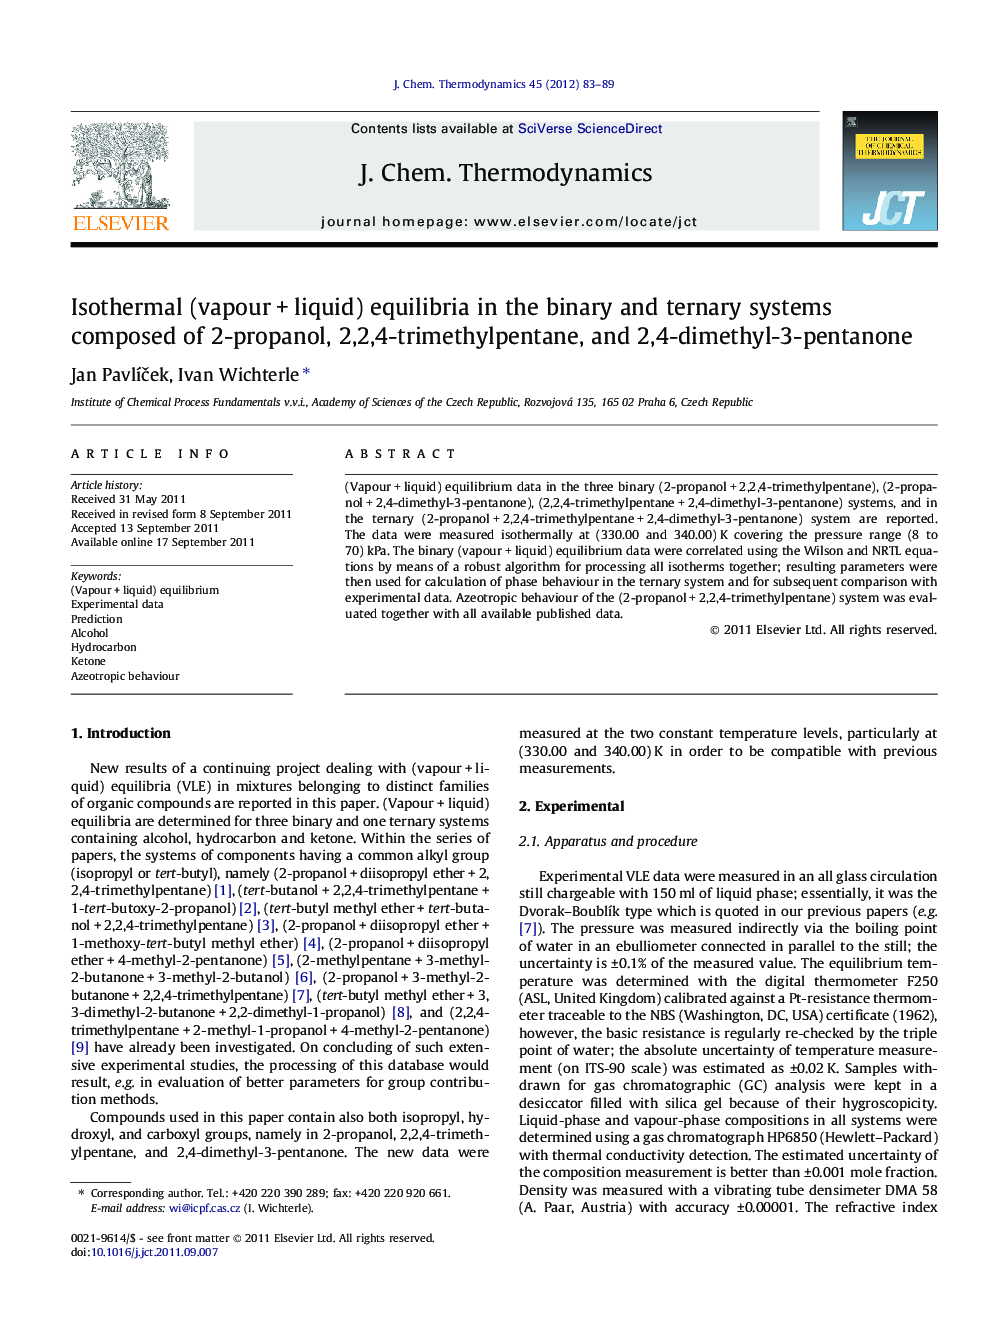 Isothermal (vapour + liquid) equilibria in the binary and ternary systems composed of 2-propanol, 2,2,4-trimethylpentane, and 2,4-dimethyl-3-pentanone